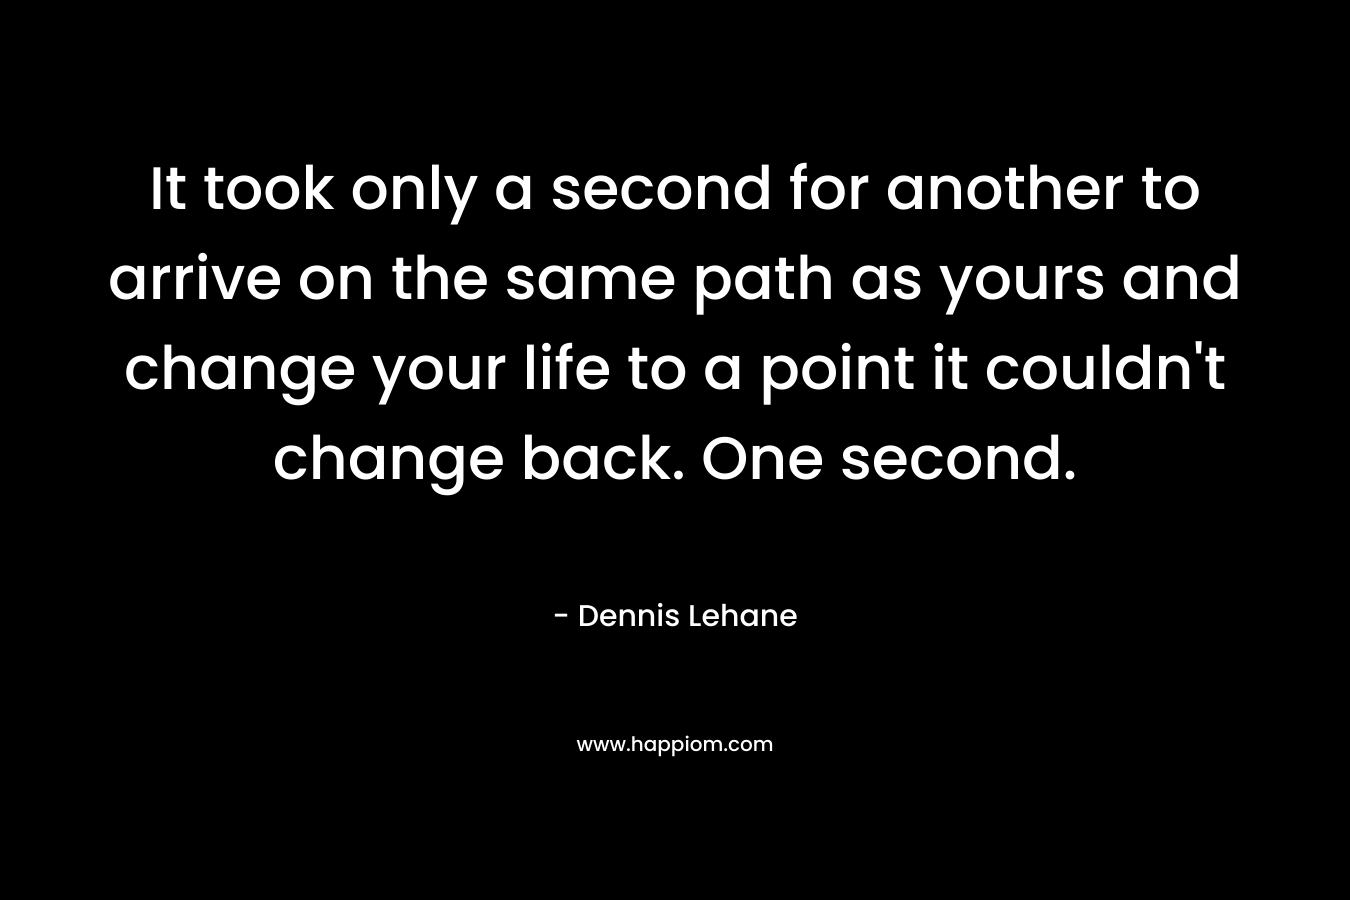 It took only a second for another to arrive on the same path as yours and change your life to a point it couldn't change back. One second.